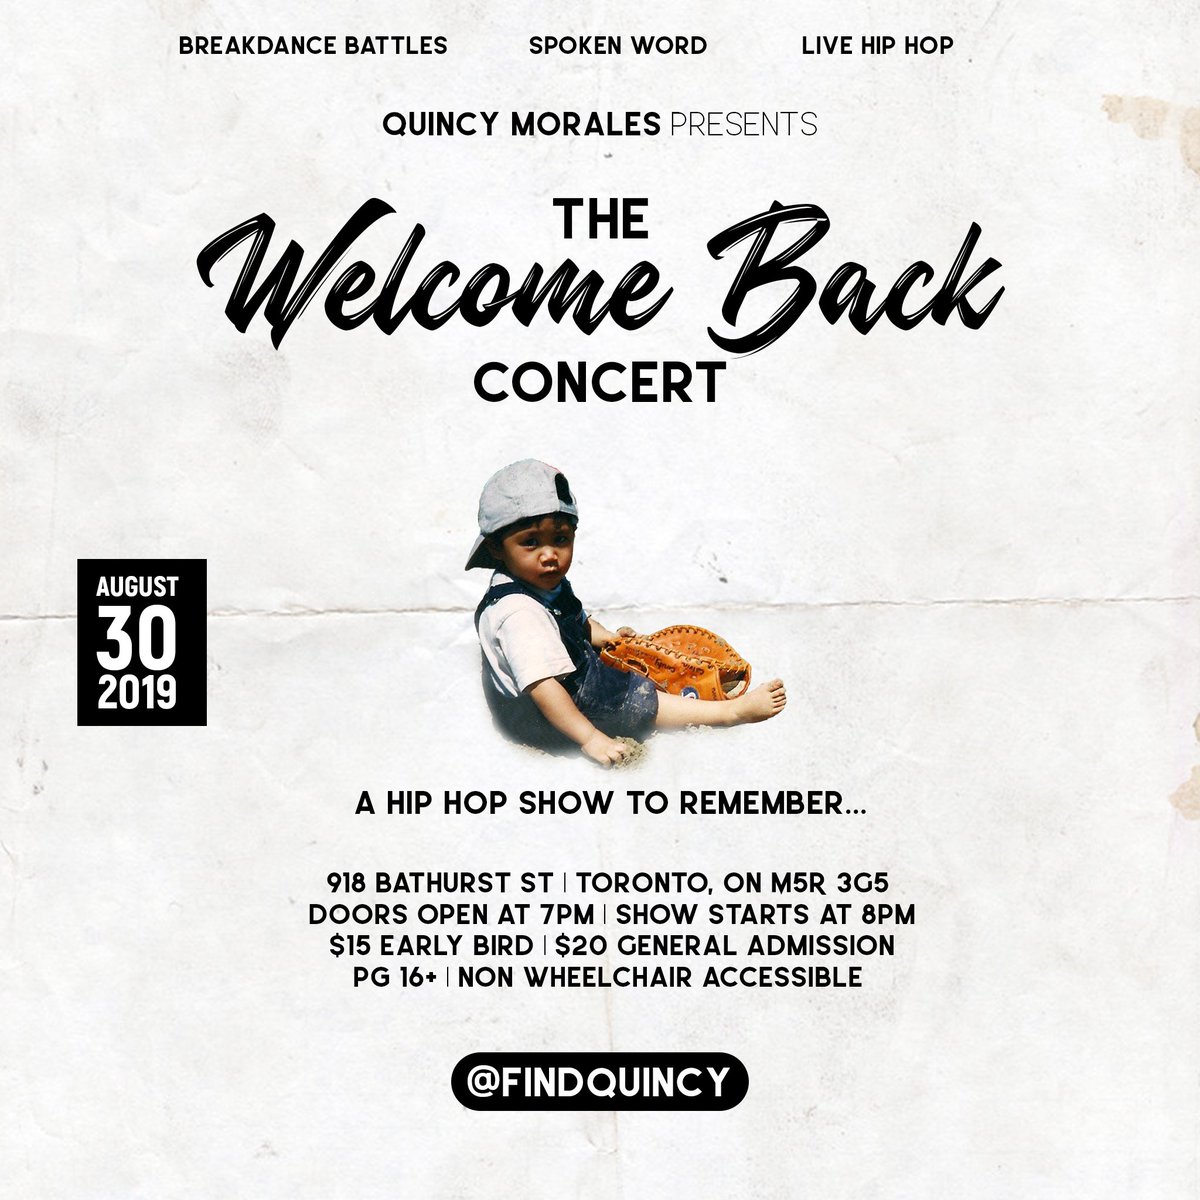 Returning to 918 Bathurst on August 30th, Quincy Morales presents the Welcome Back Concert - a hip hop night to remember. Purchase tickets here: ow.ly/Gfcj50vEA0j